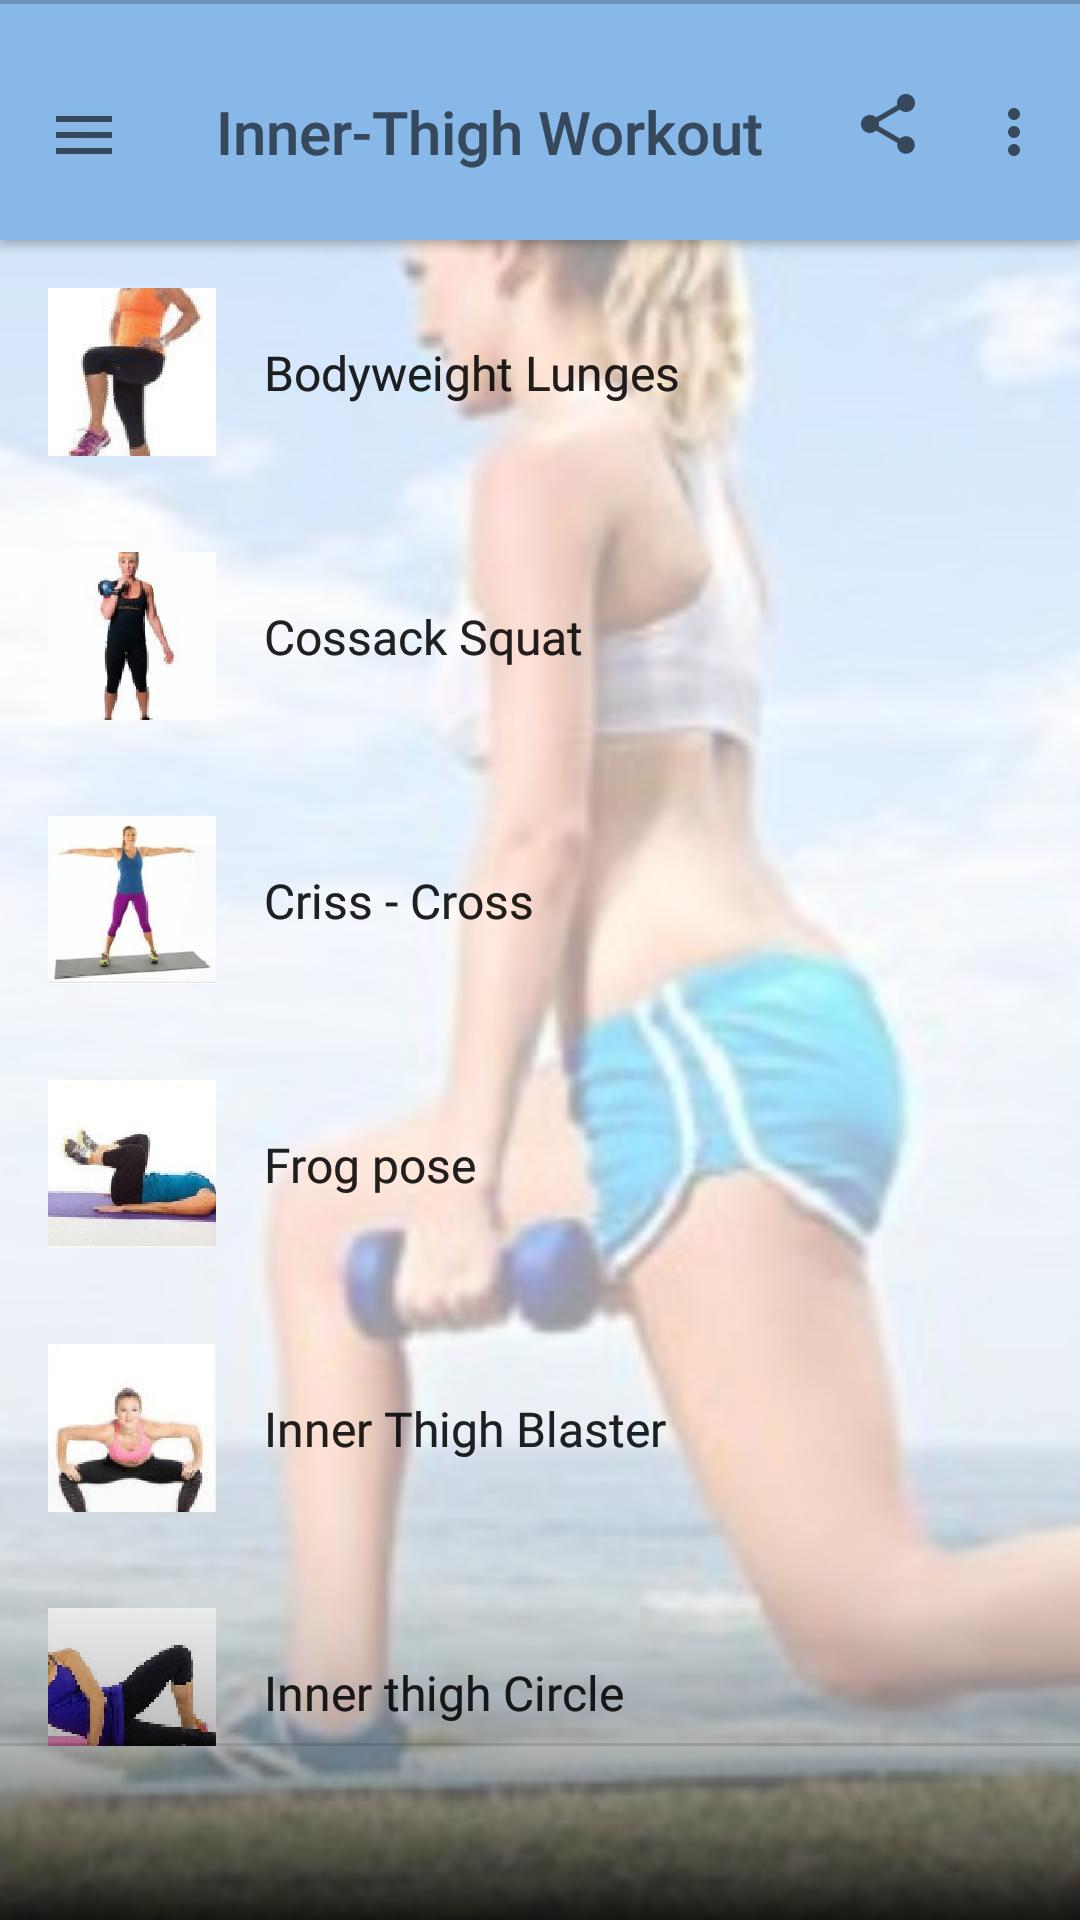 Leg Gap Workout: Leg Exercise At Home for Android - APK Download